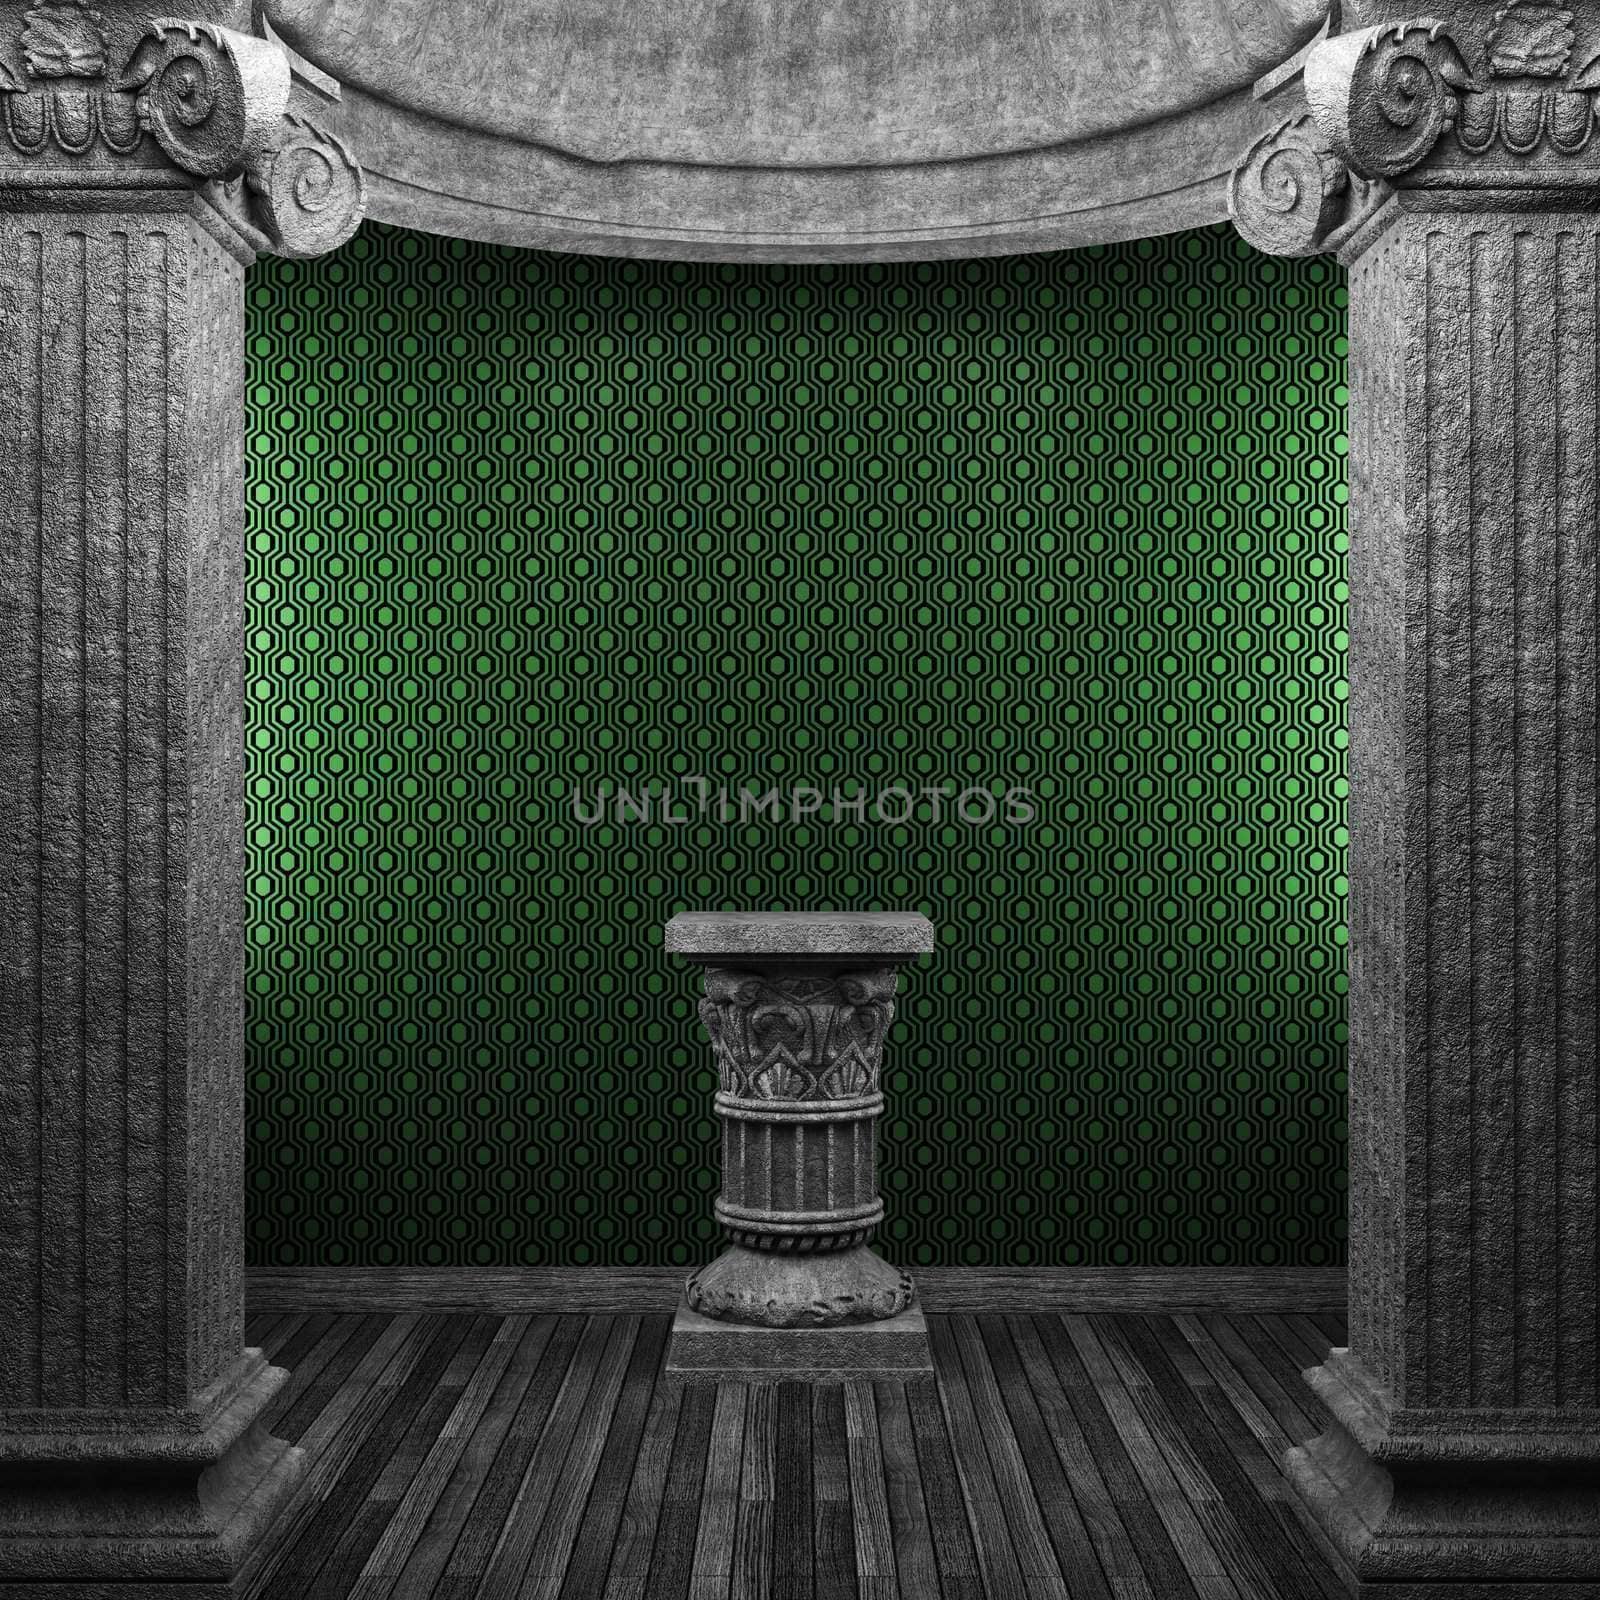 stone columns, pedestal and wallpaper by icetray